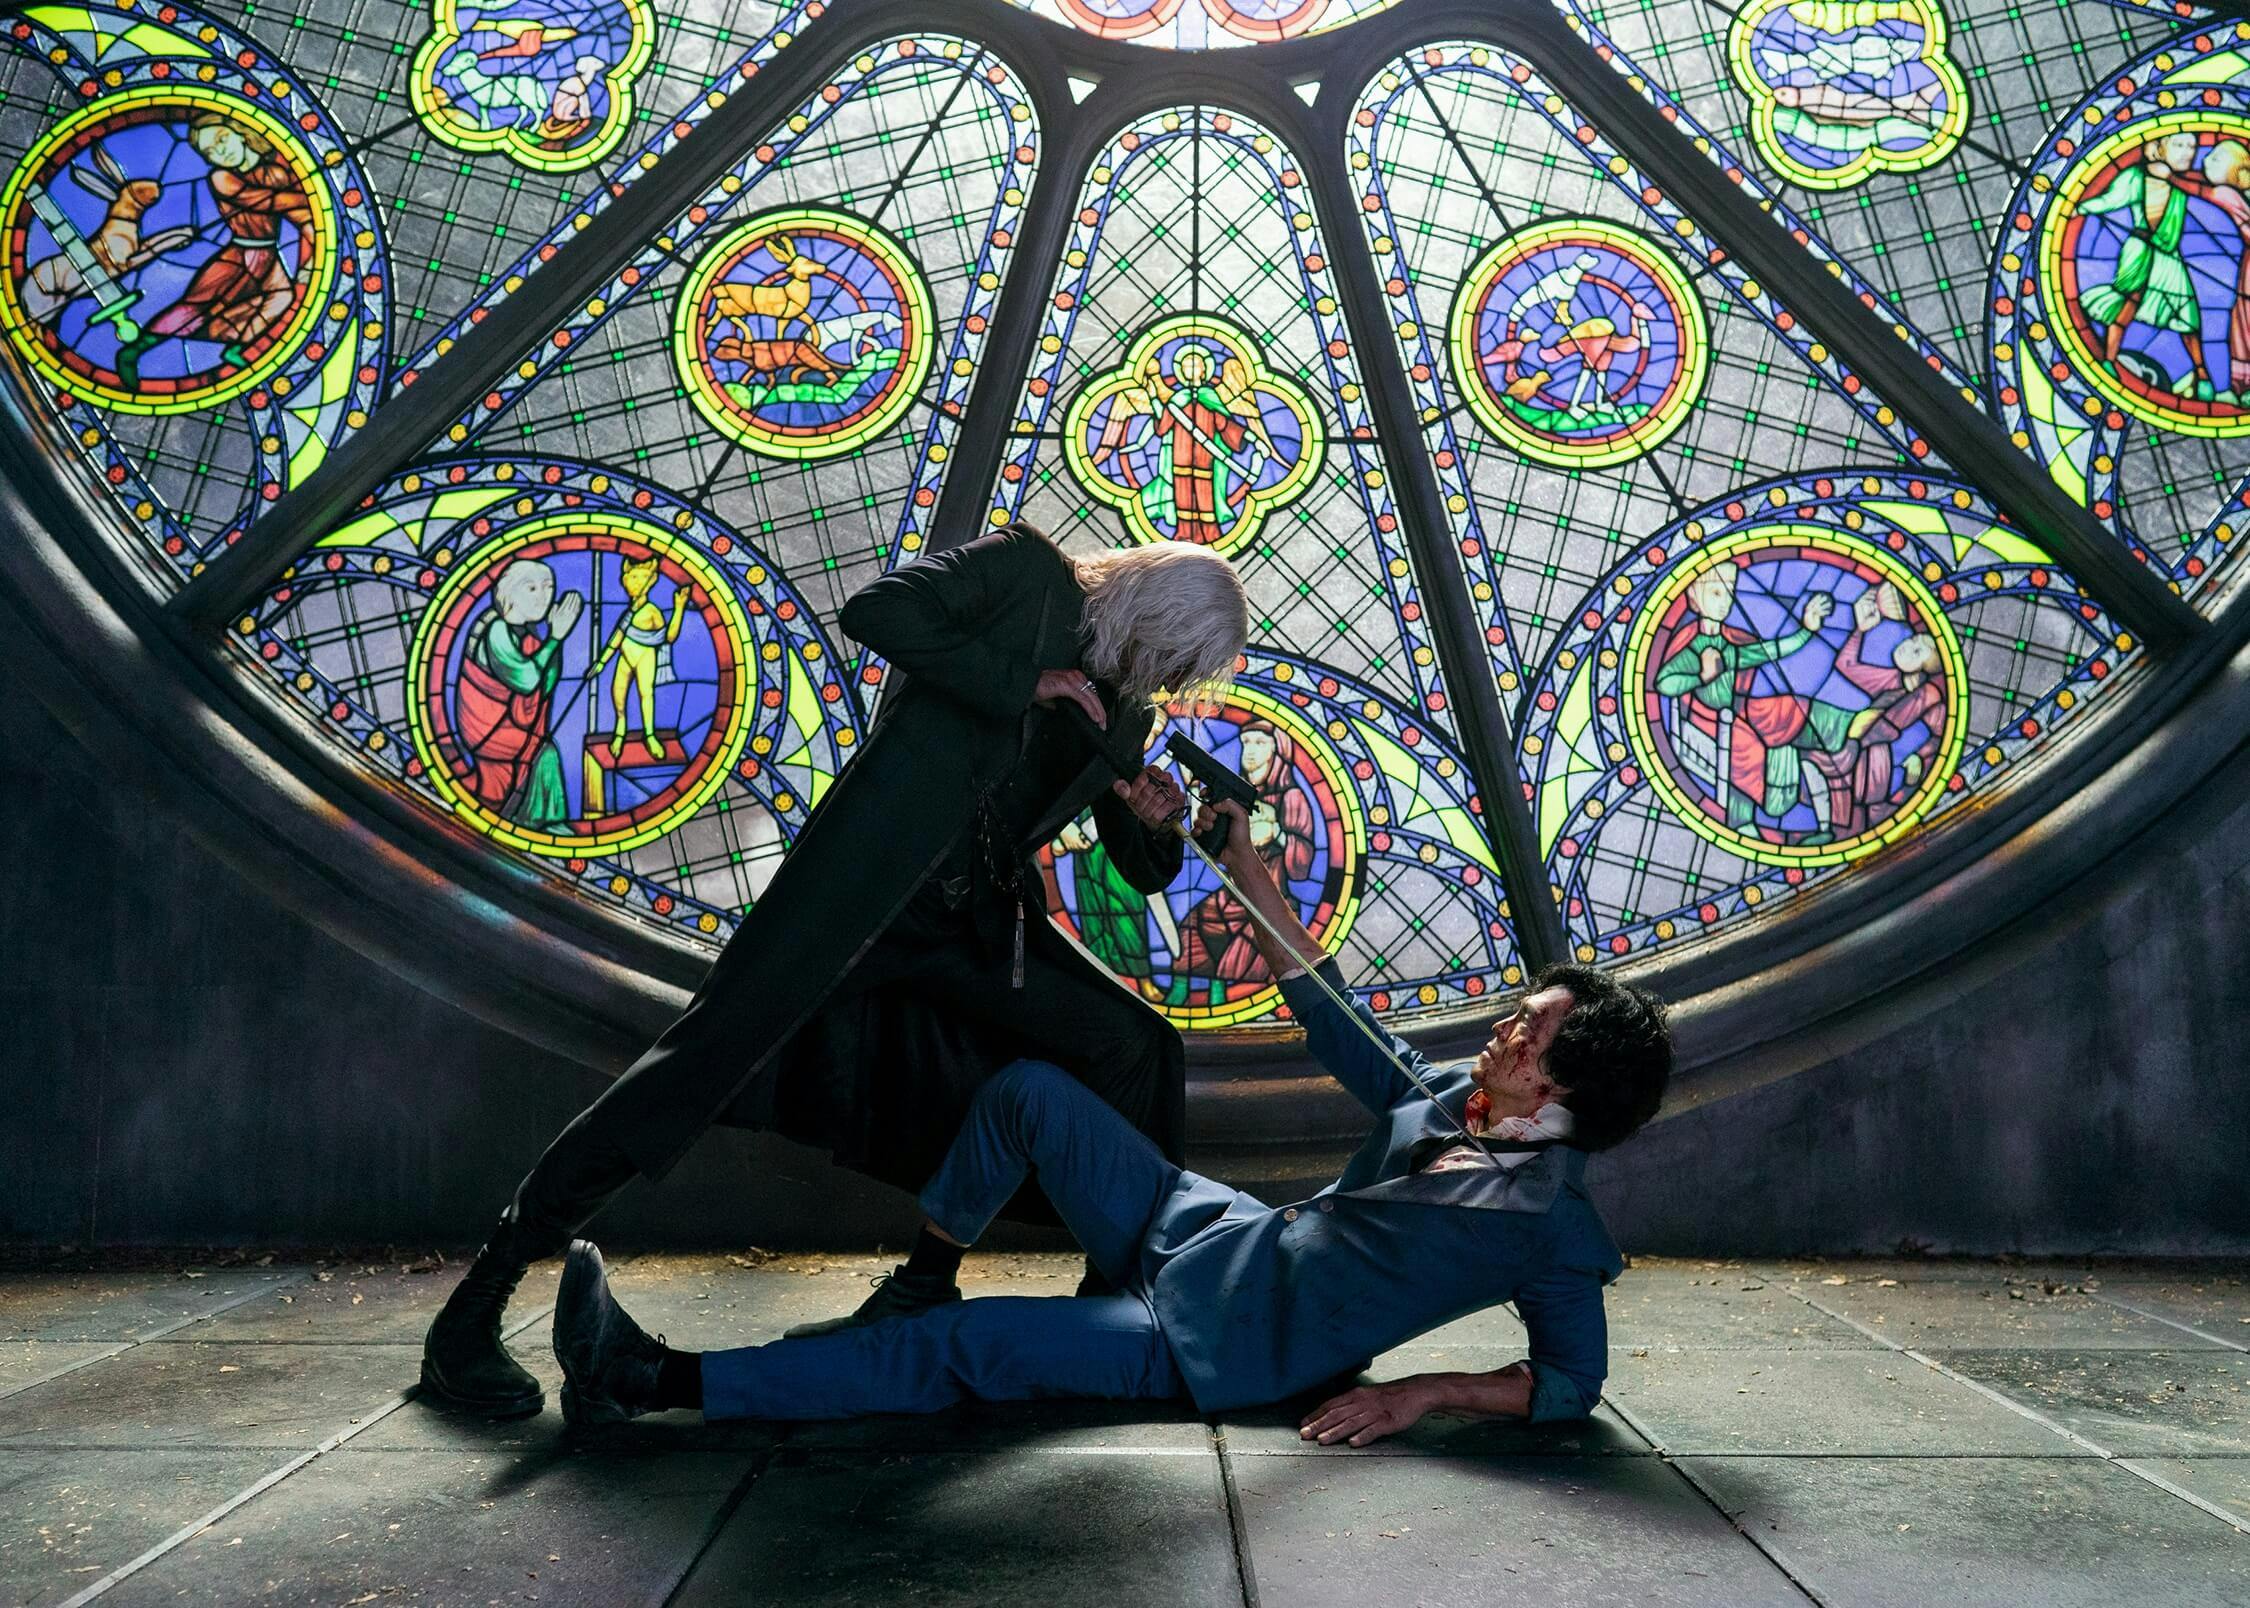 Alex Hassell and John Cho face off in front of a stained class window.